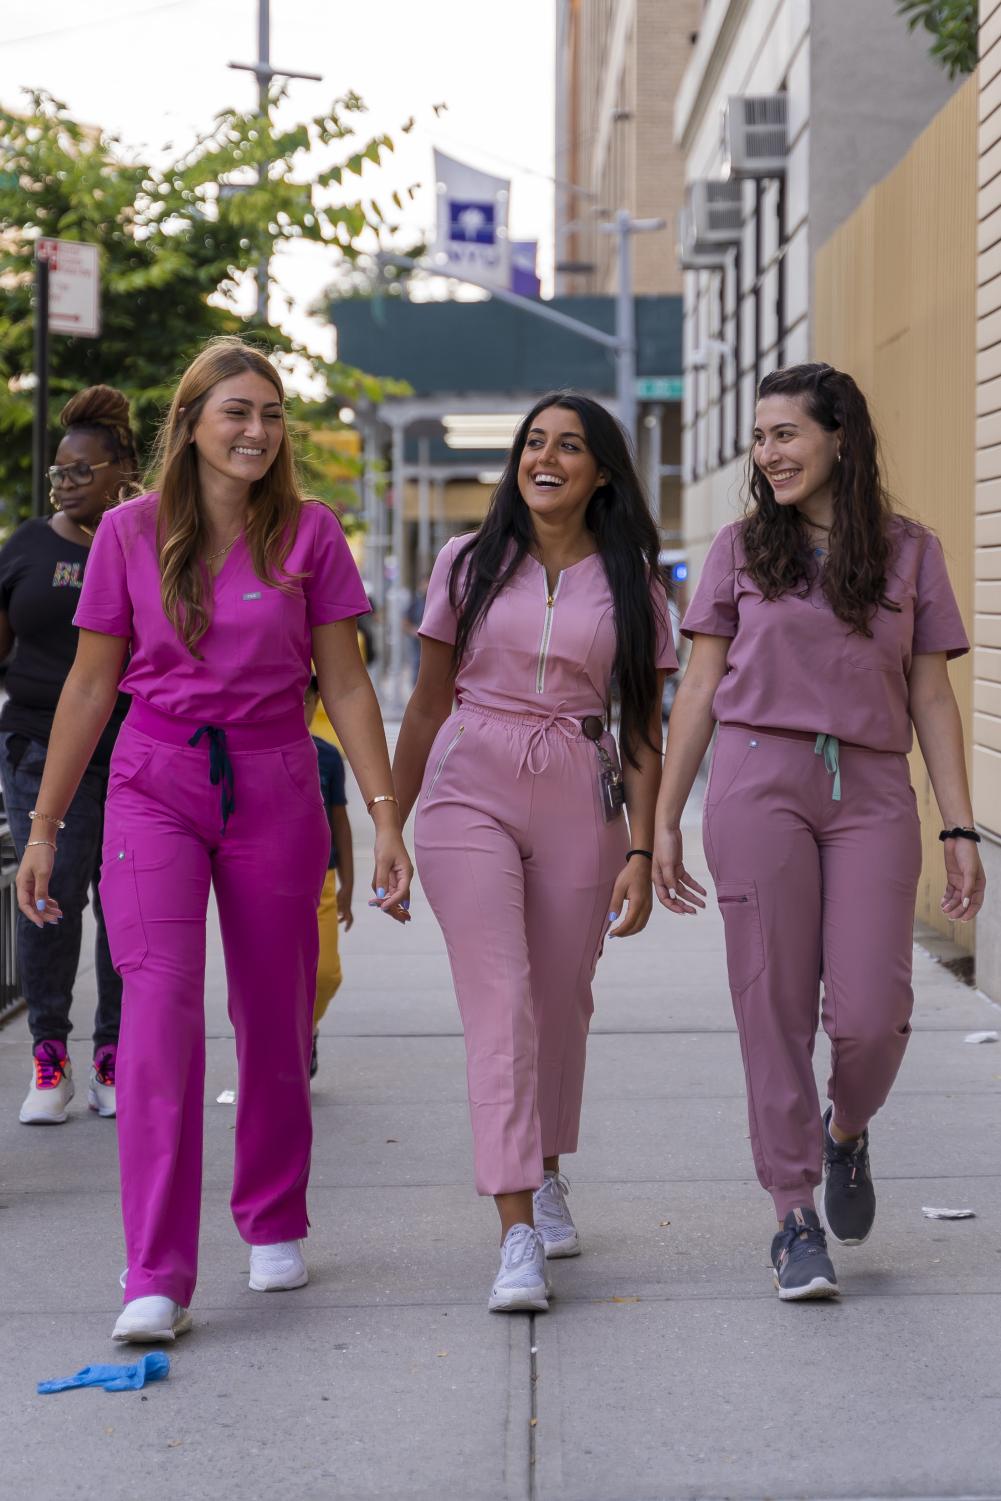 Danielle Mark (left), Shannon Partovi (middle) and Daniella Babayev (right) are conversing as they walk outside of a Meyers building. They are all wearing pink scrubs.